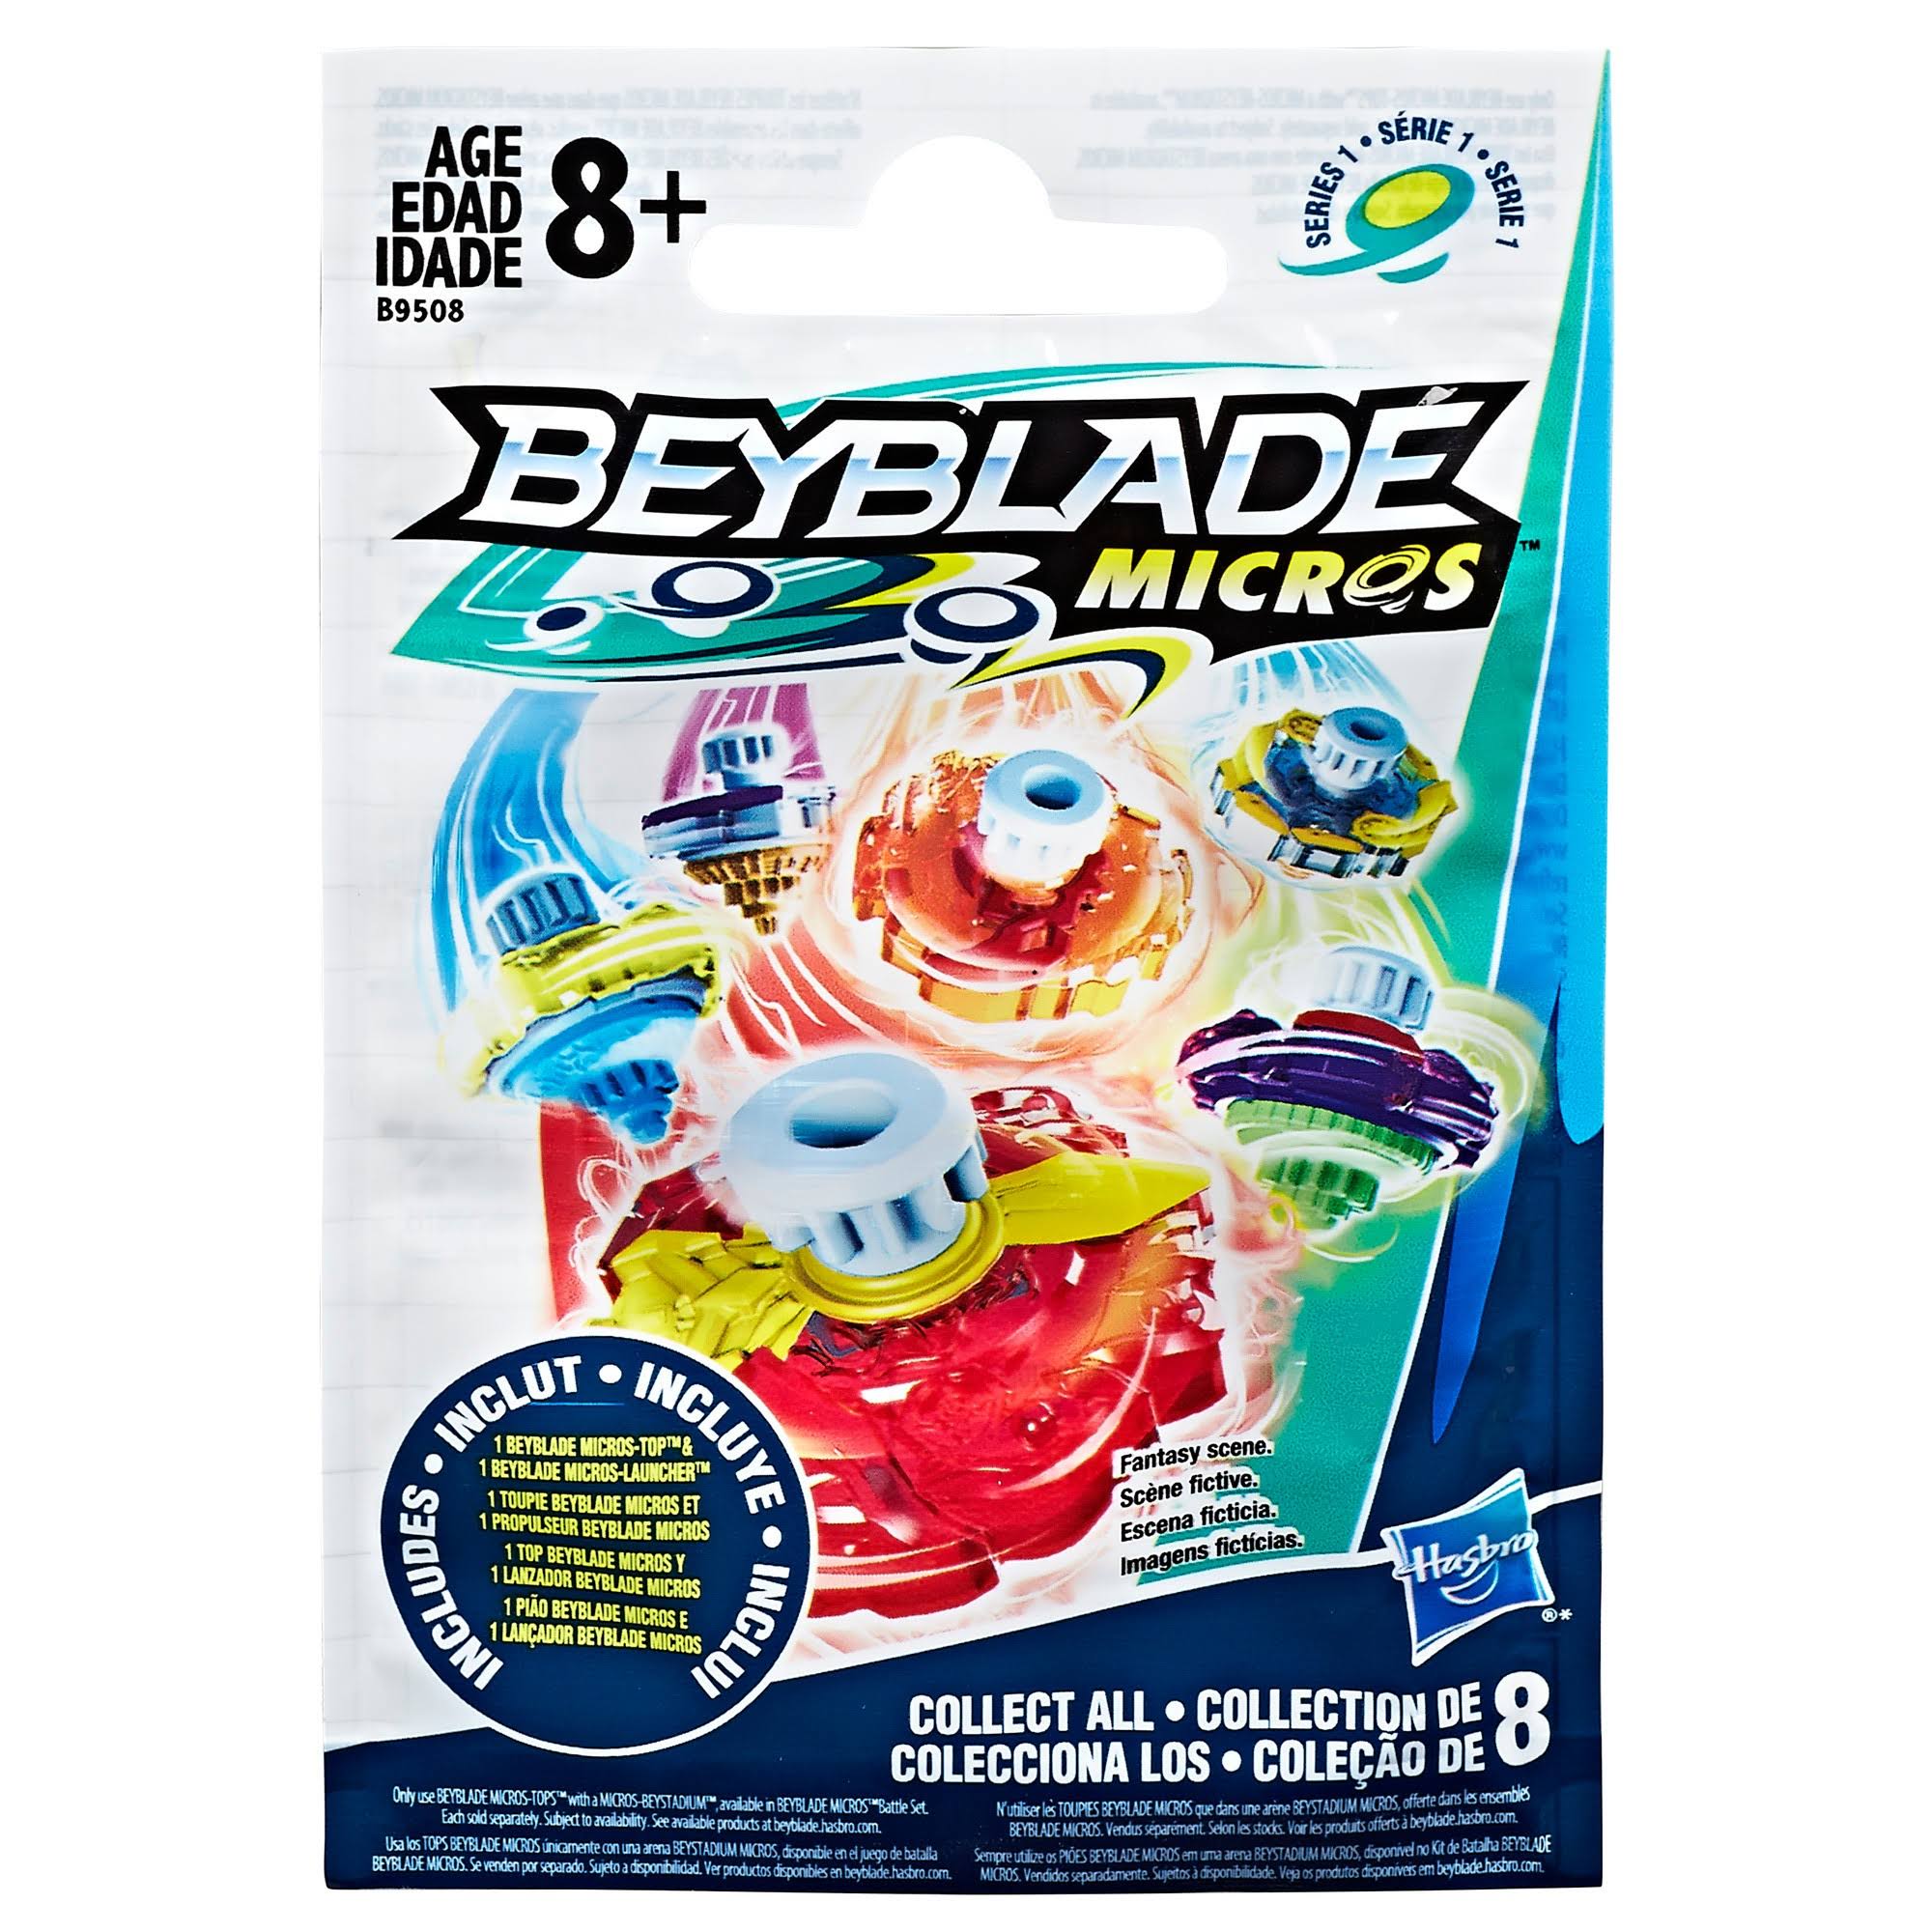 Beyblade Micros Toy, Series 3, Age 8+